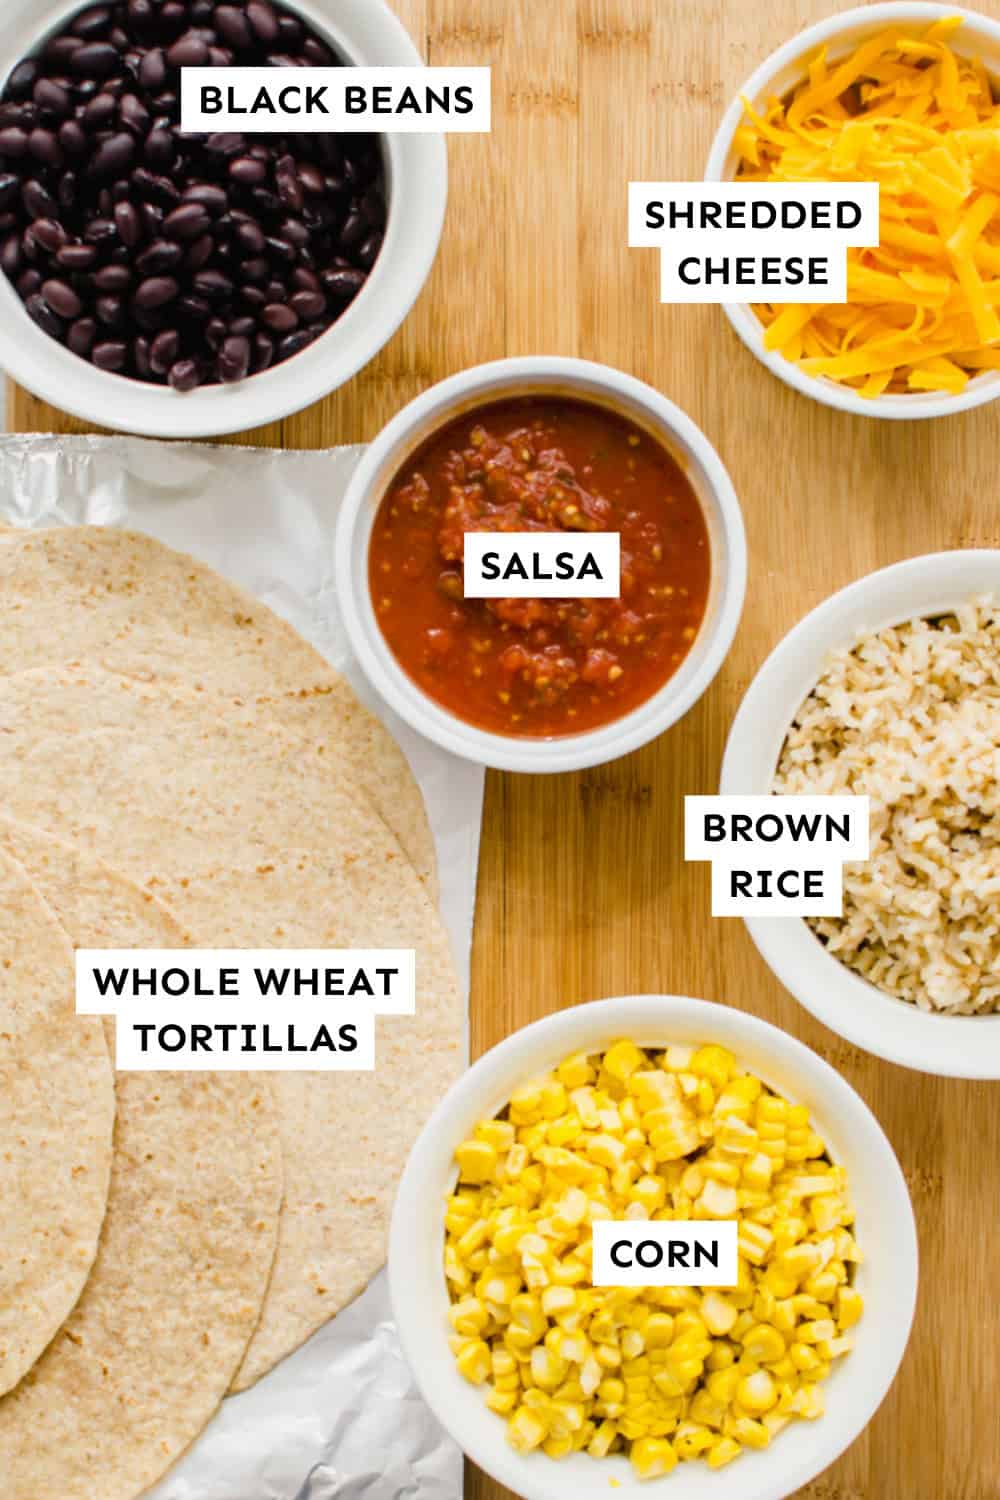 Make-ahead lunch wrap ingredients laid out in bowls and labeled.